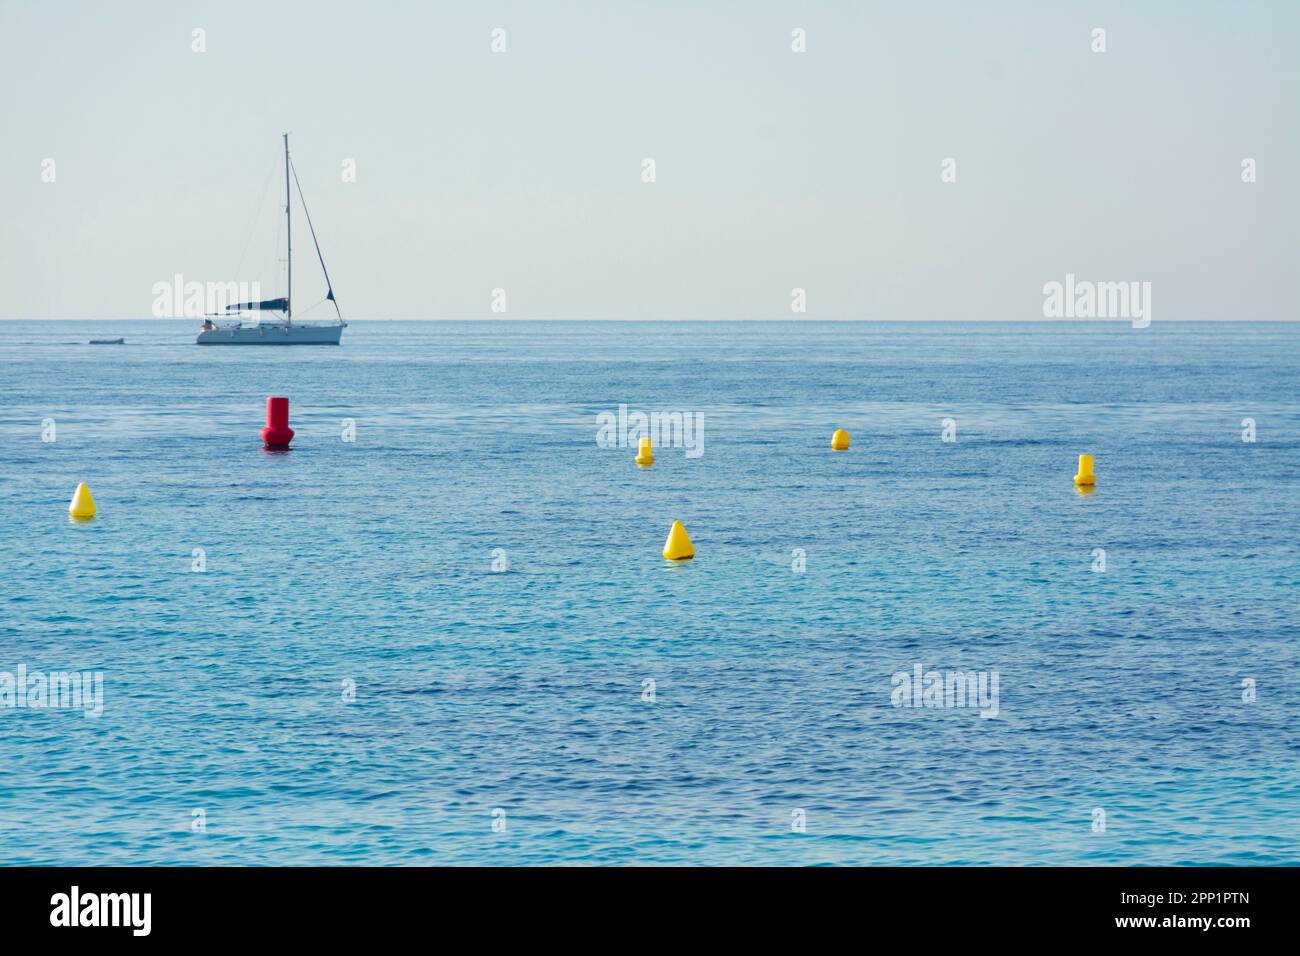 Sailboat sailing off the coast of Ses Illetes, in Mallorca, with buoys in the water Stock Photo